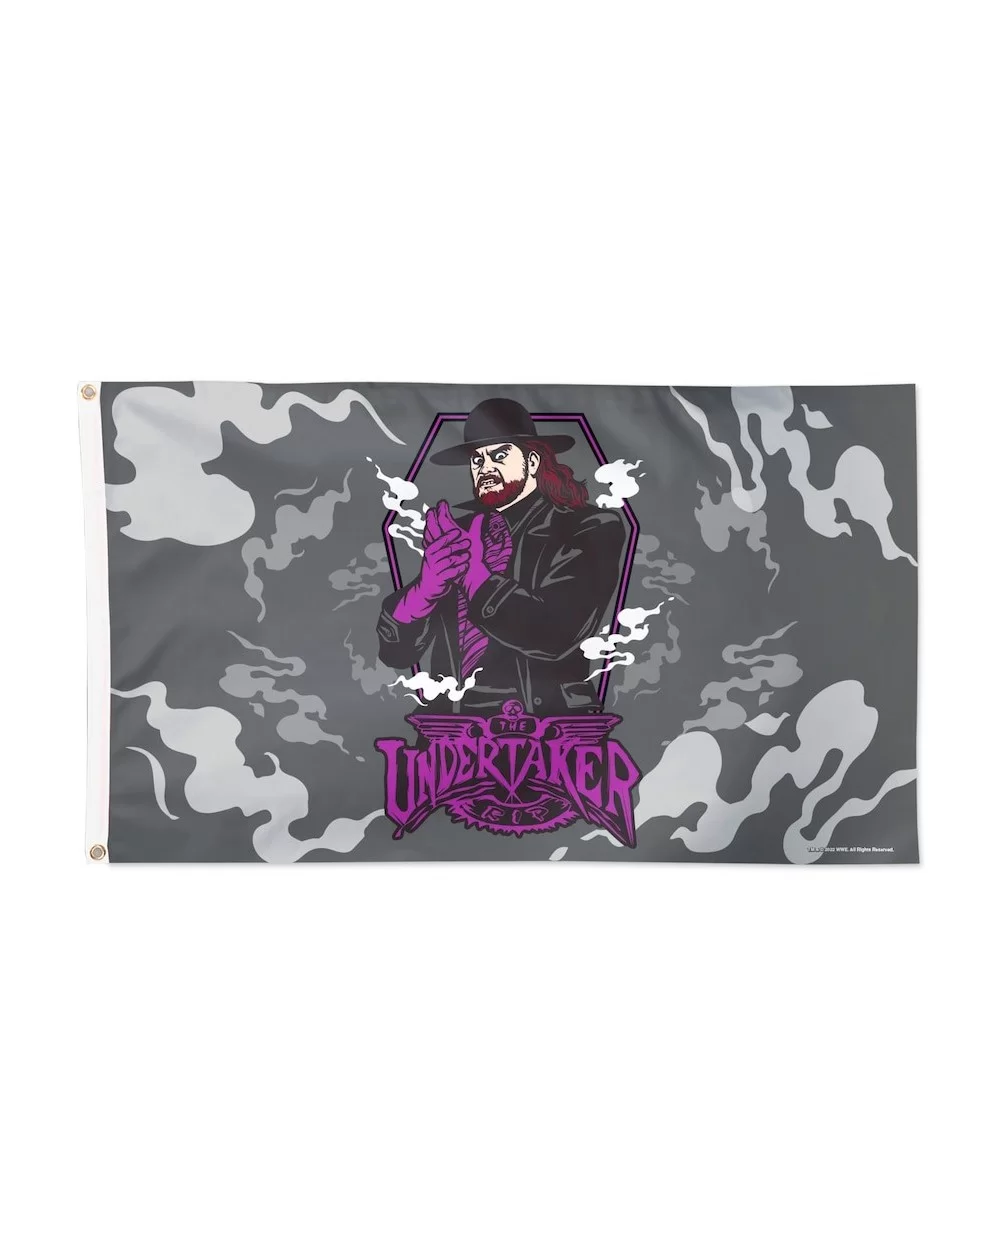 WinCraft The Undertaker 3' x 5' Single-Sided Flag $18.80 Home & Office